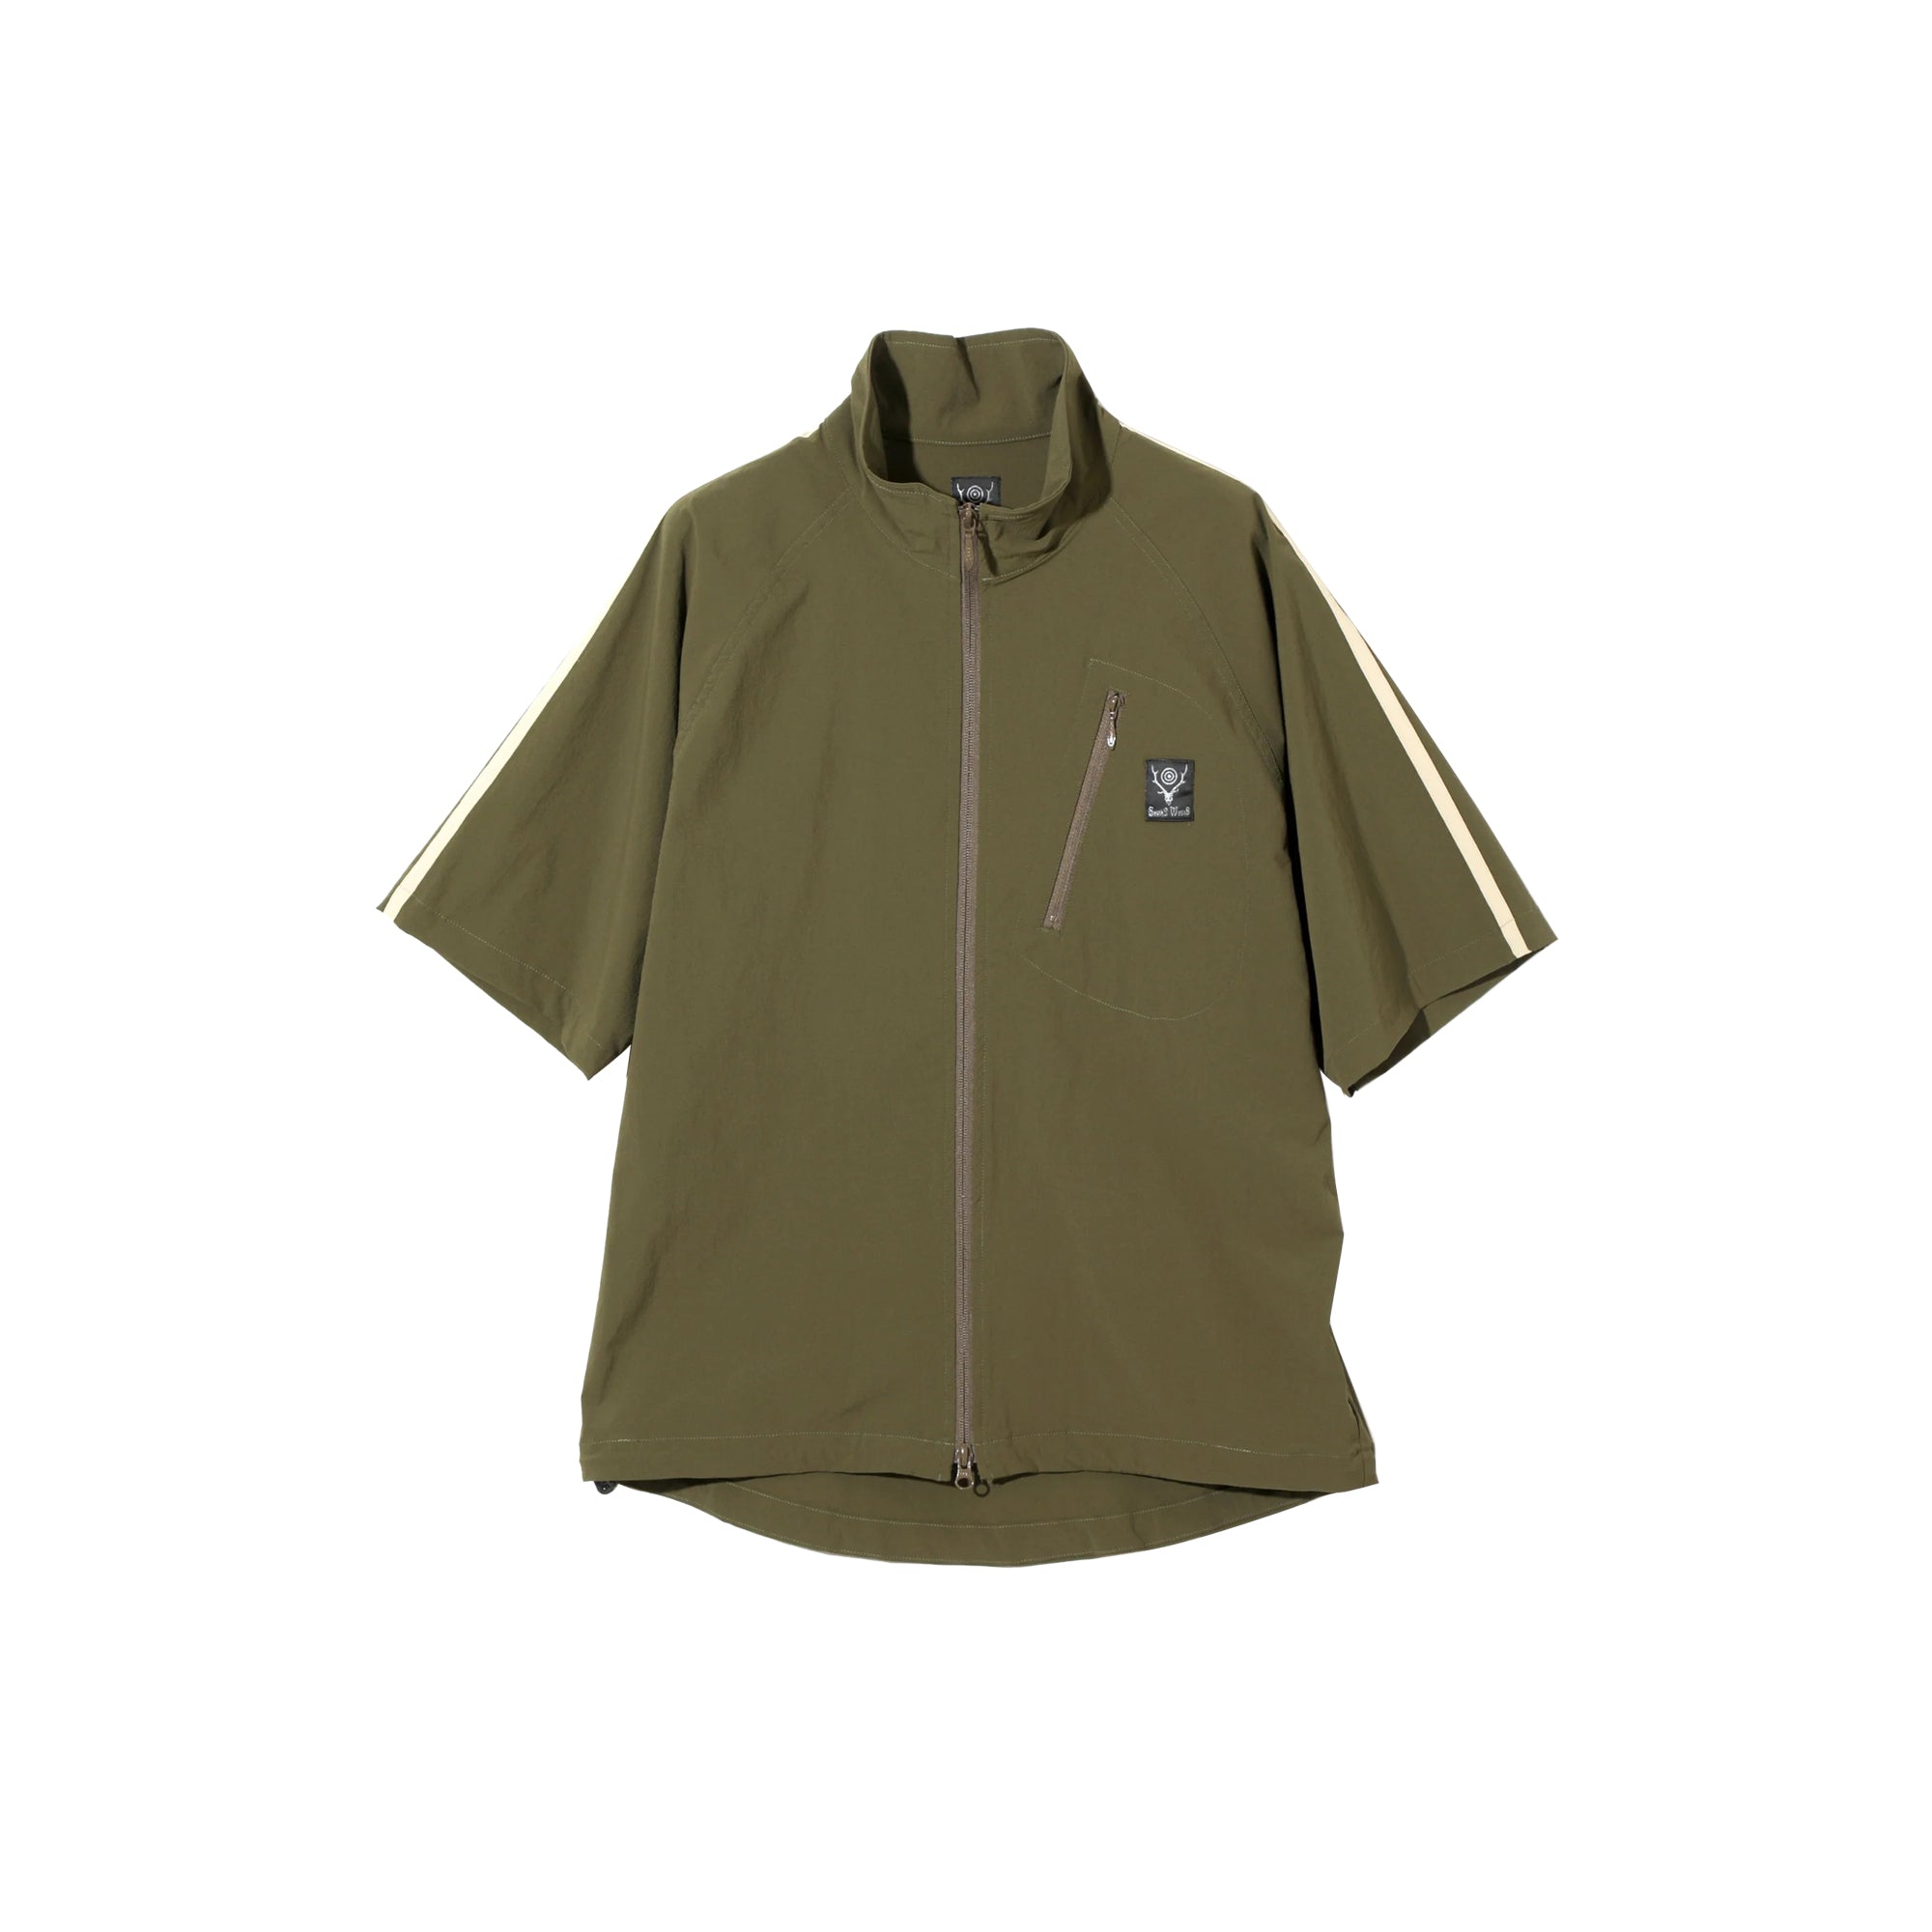 South2 West8 Mens S.L. Zipped Trail Shirt – Extra Butter